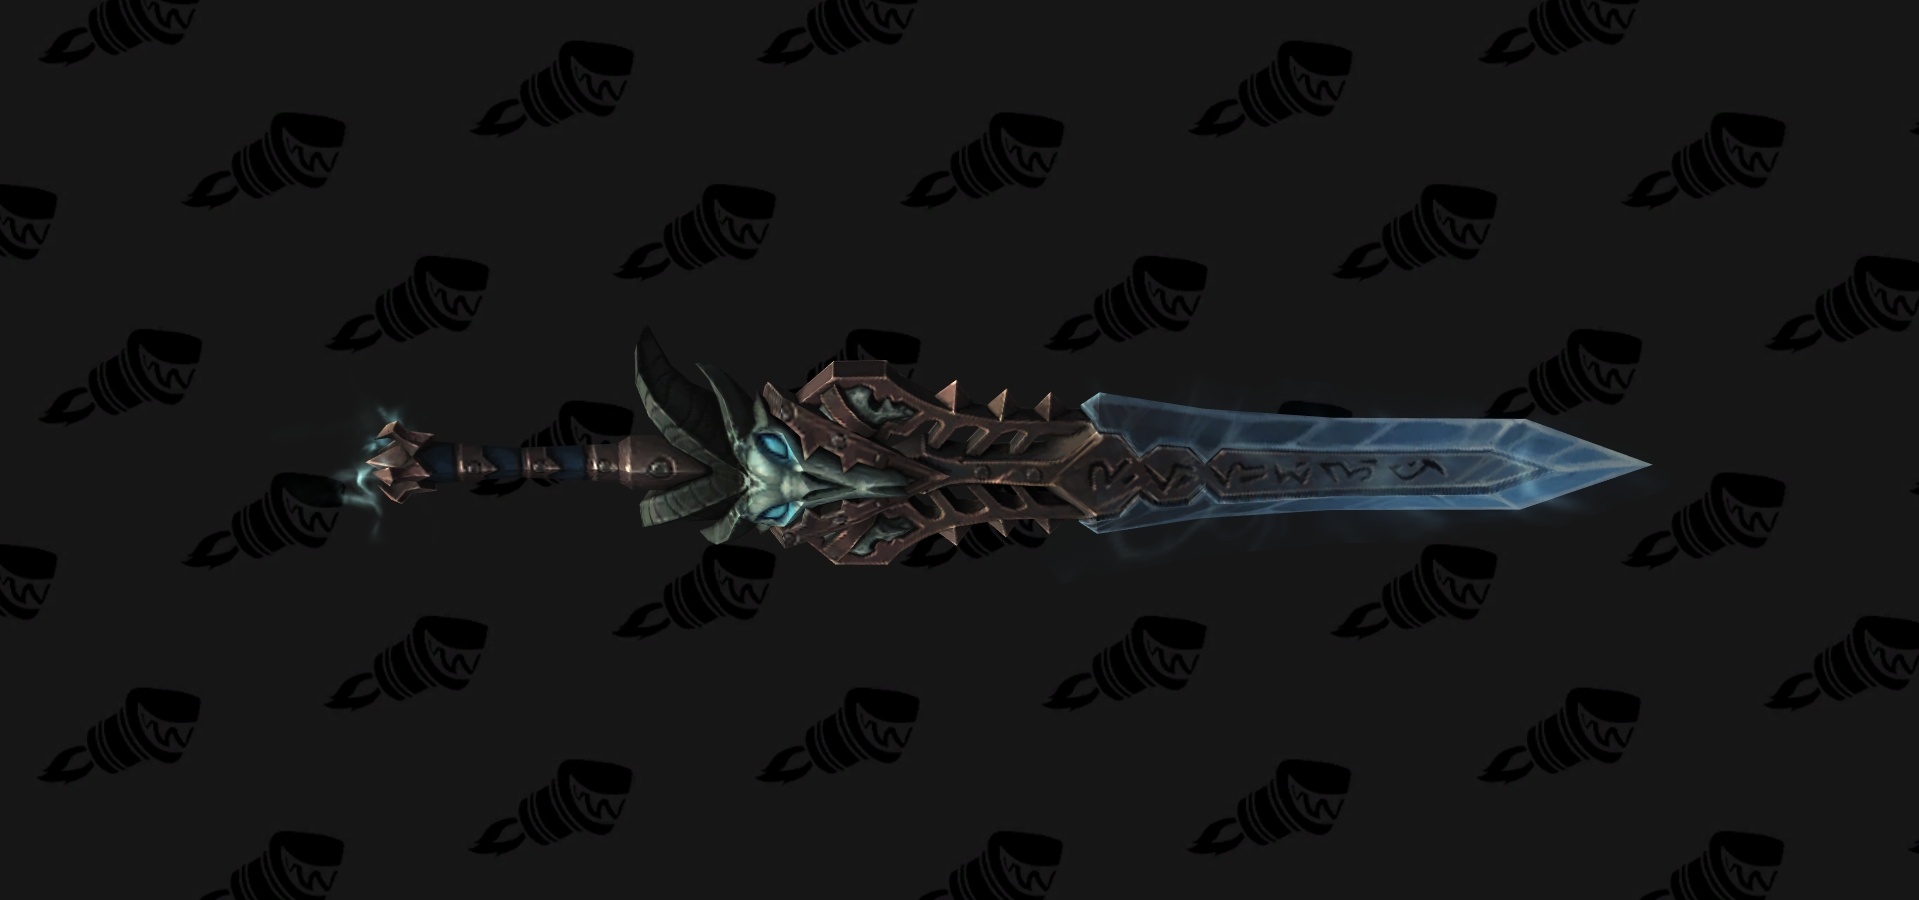 Frost Death Knight Artifact Weapon: Blades of the Fallen Prince